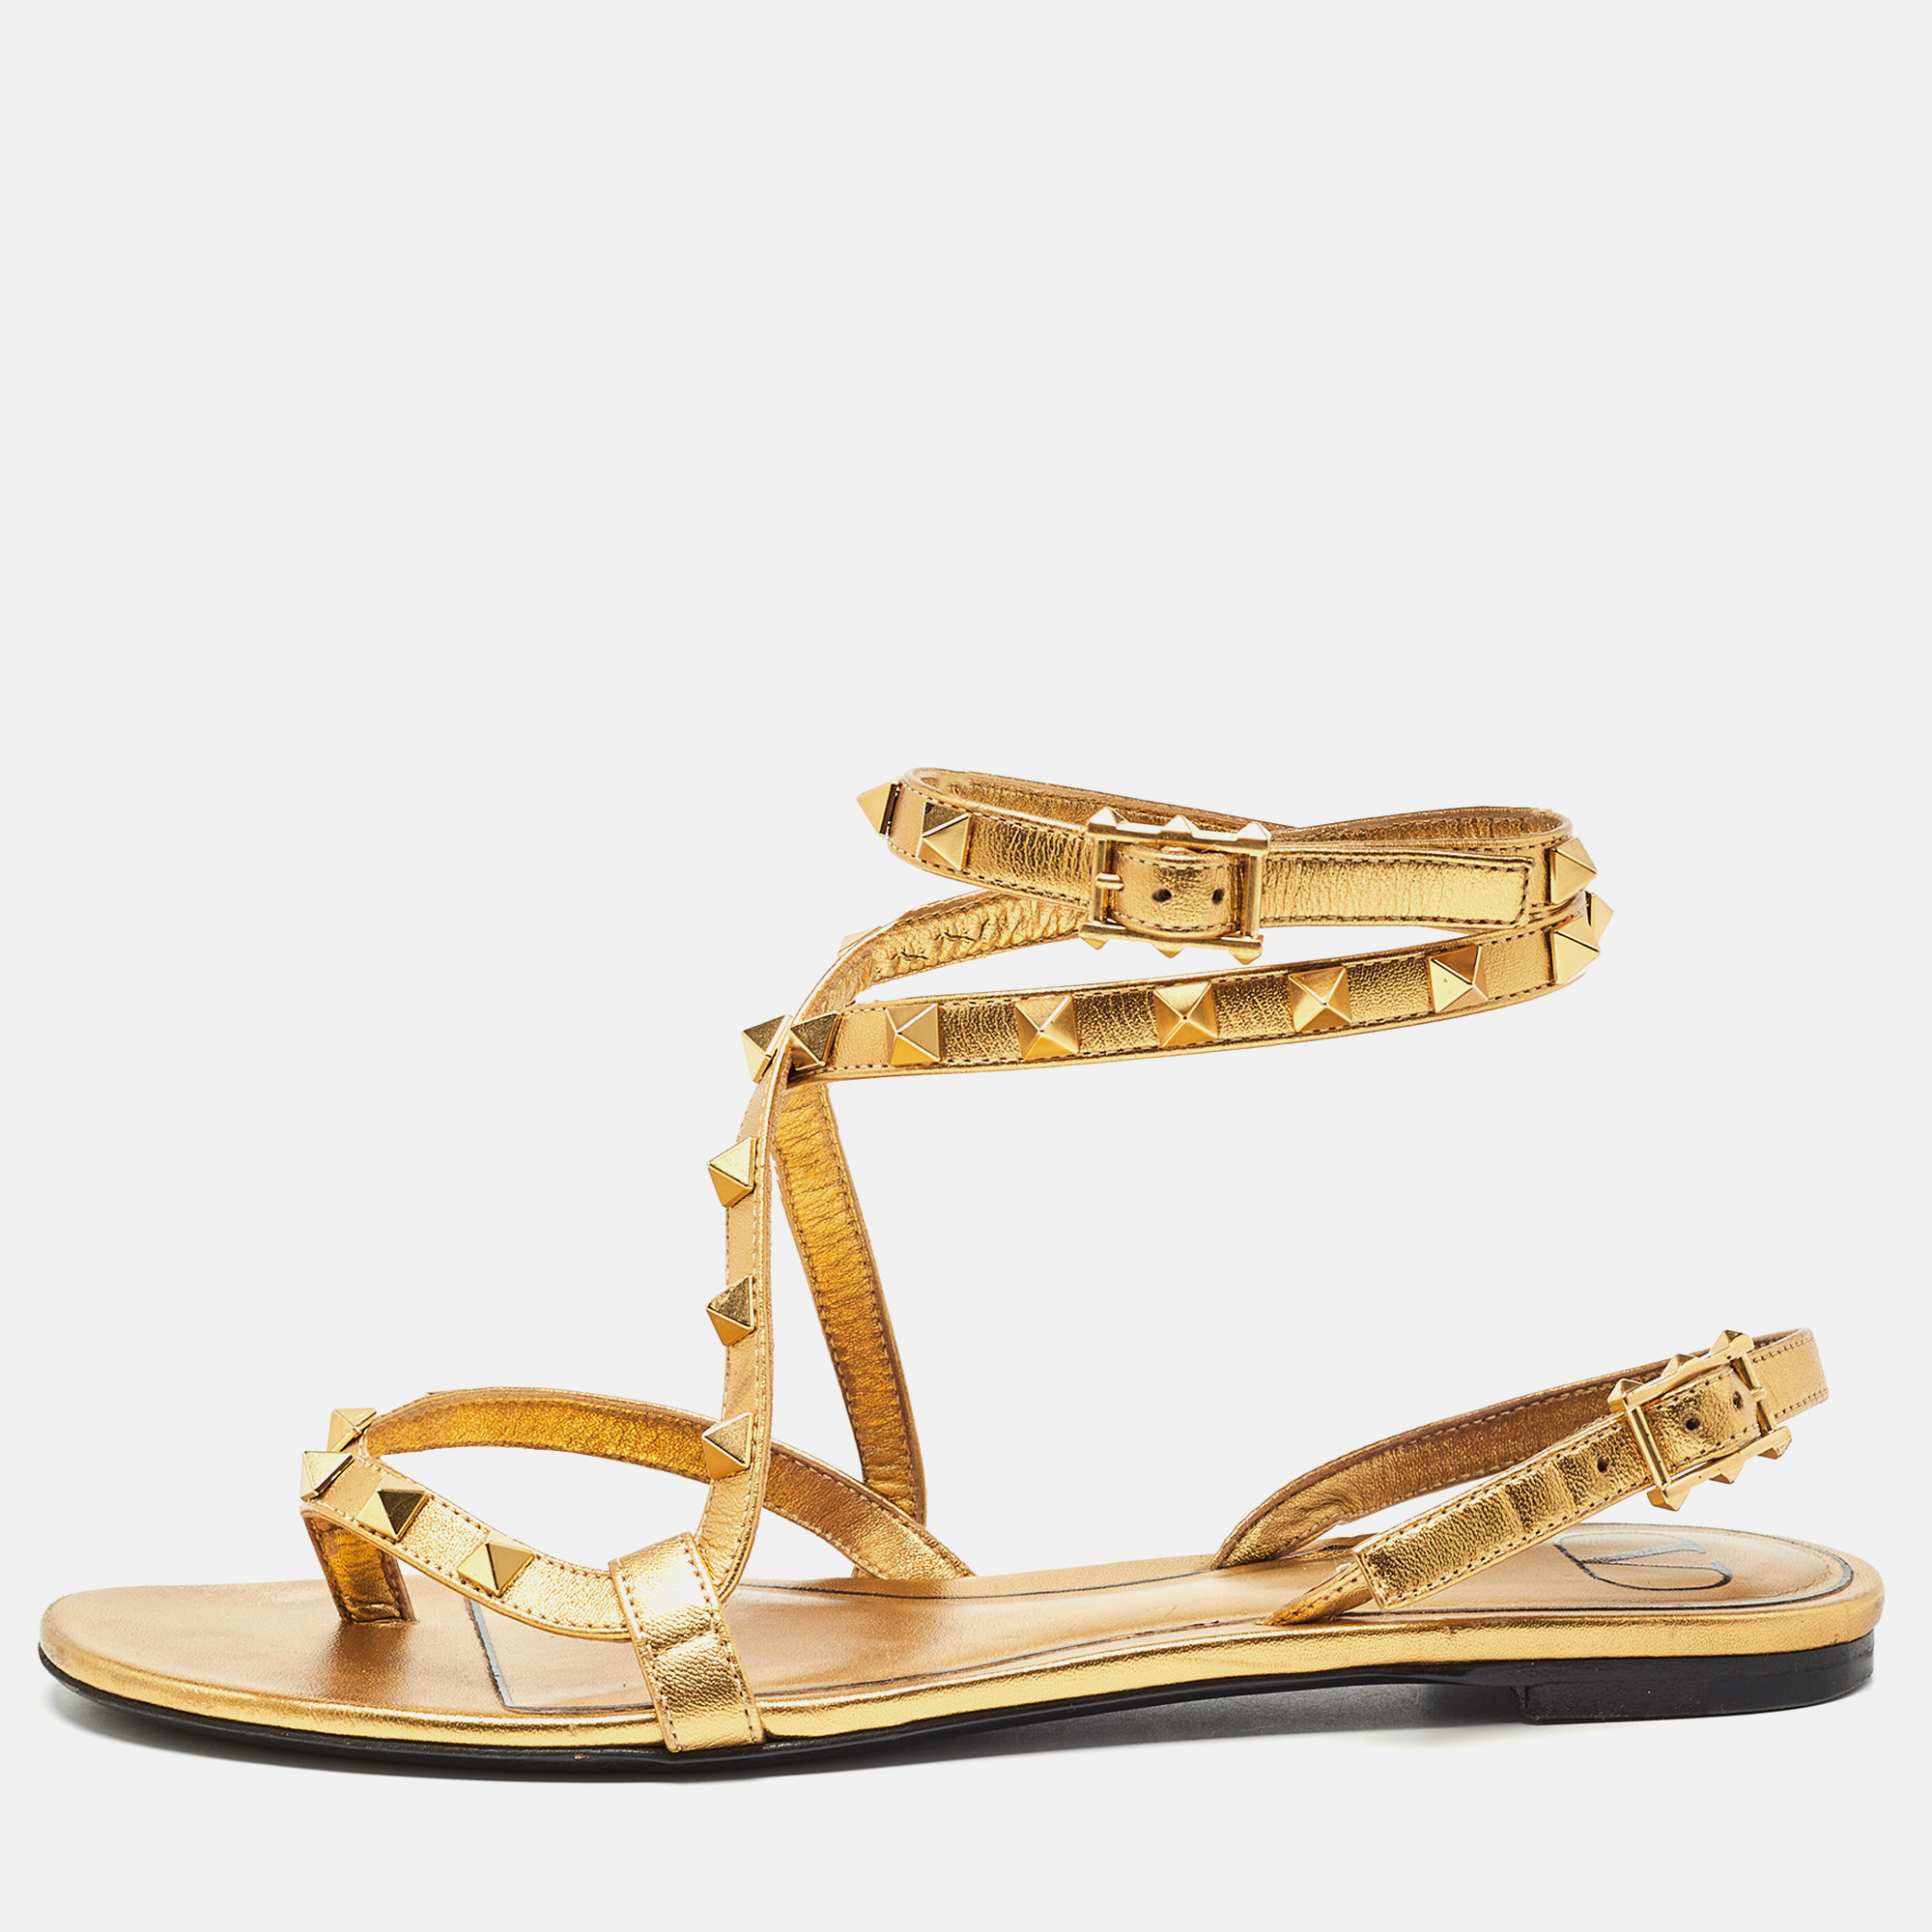 Valentino gold leather rockstud ankle strap flat sandals size 38.5